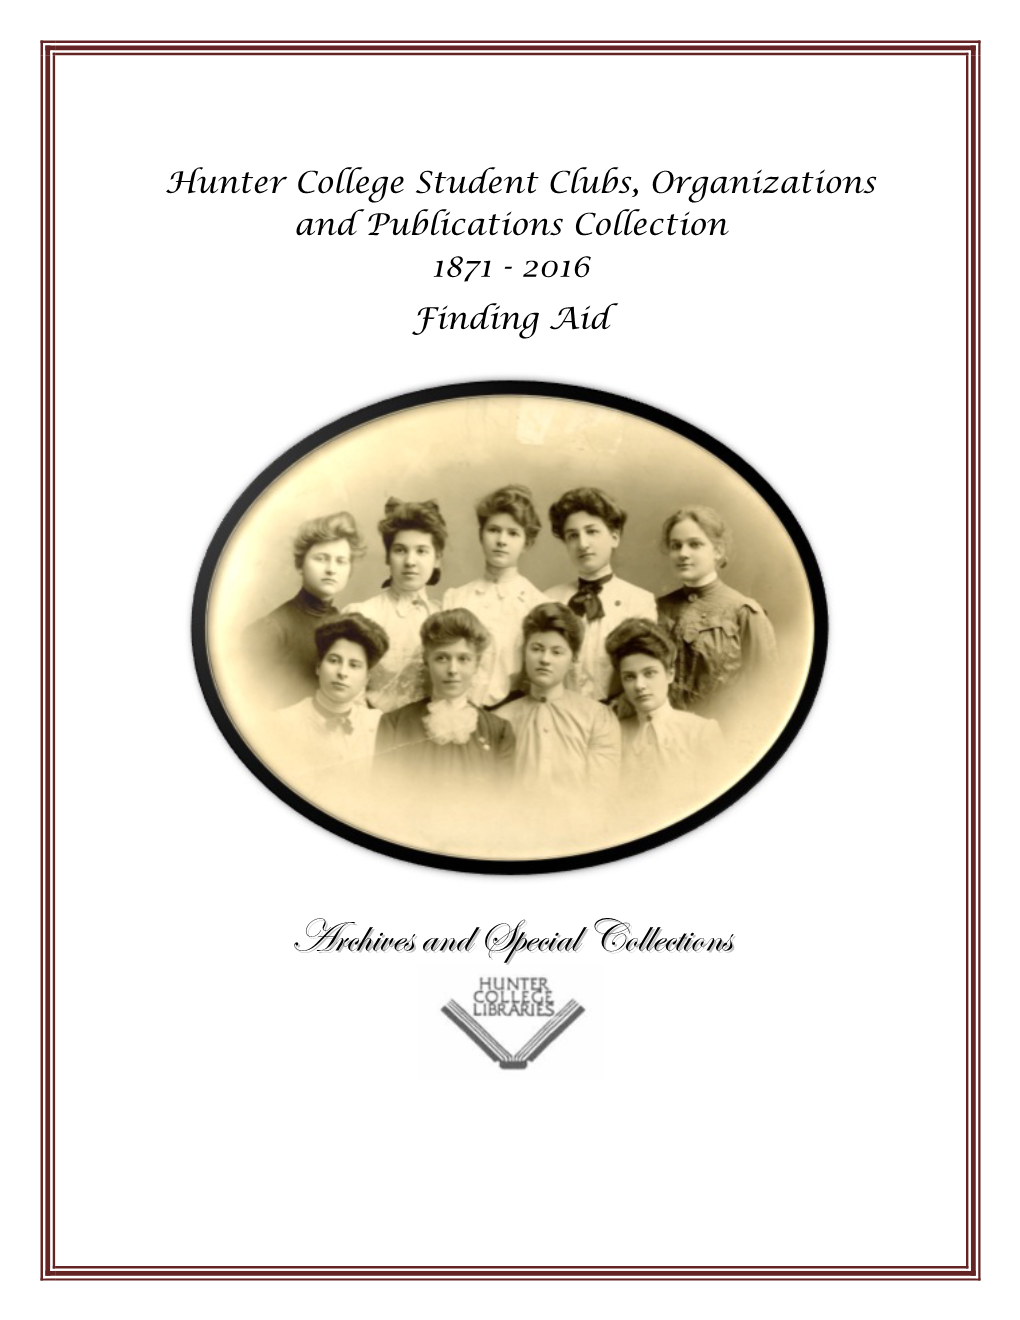 Hunter College Student Clubs, Organizations, and Publications